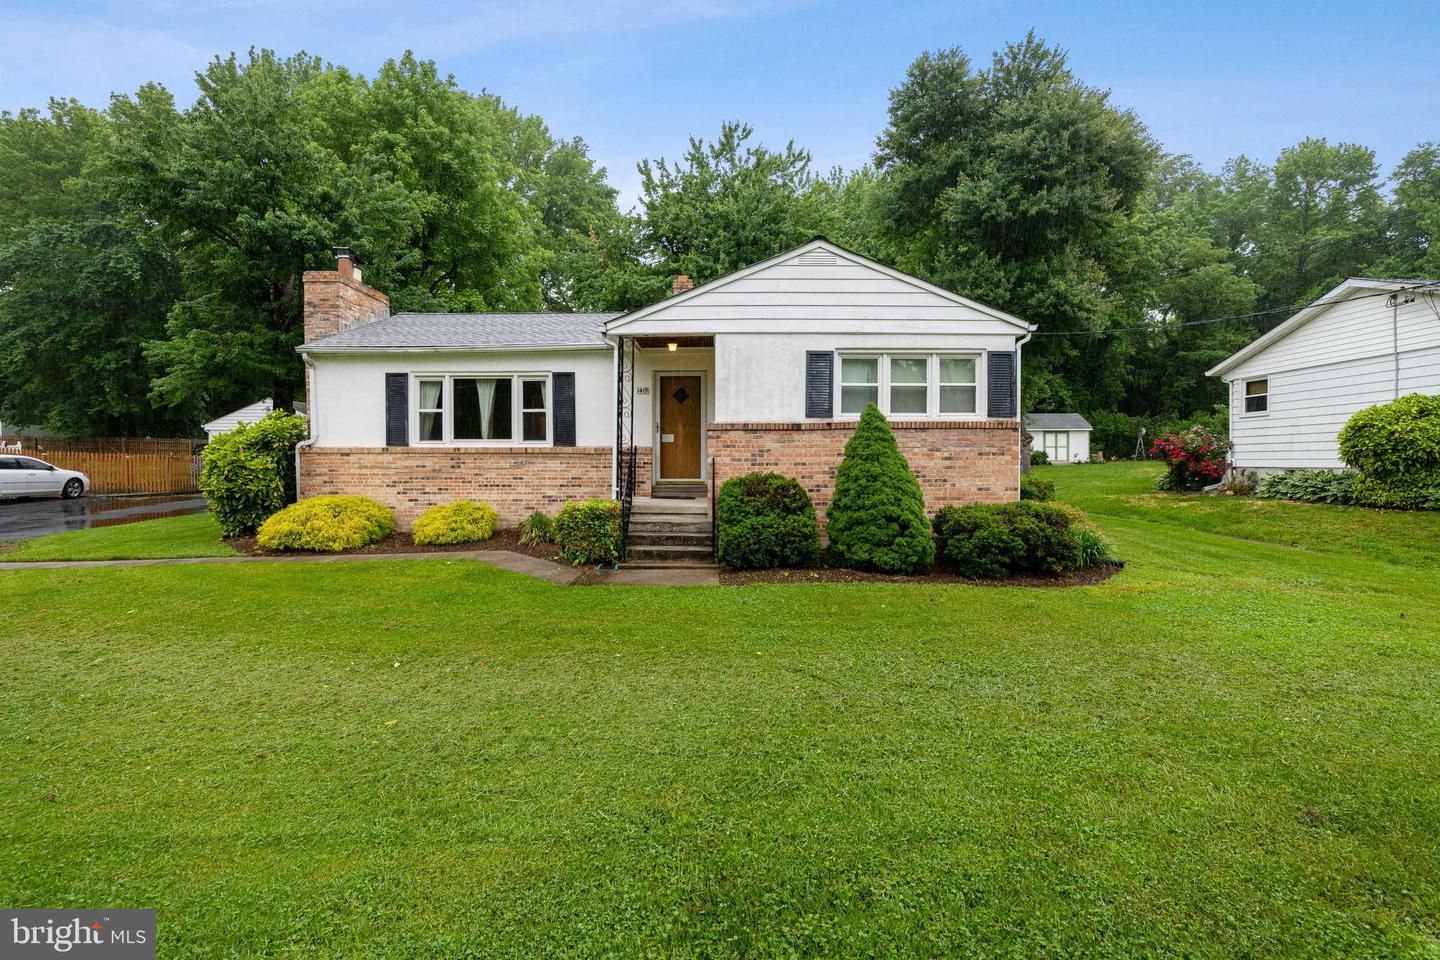 Homes for sale Poolesville MD